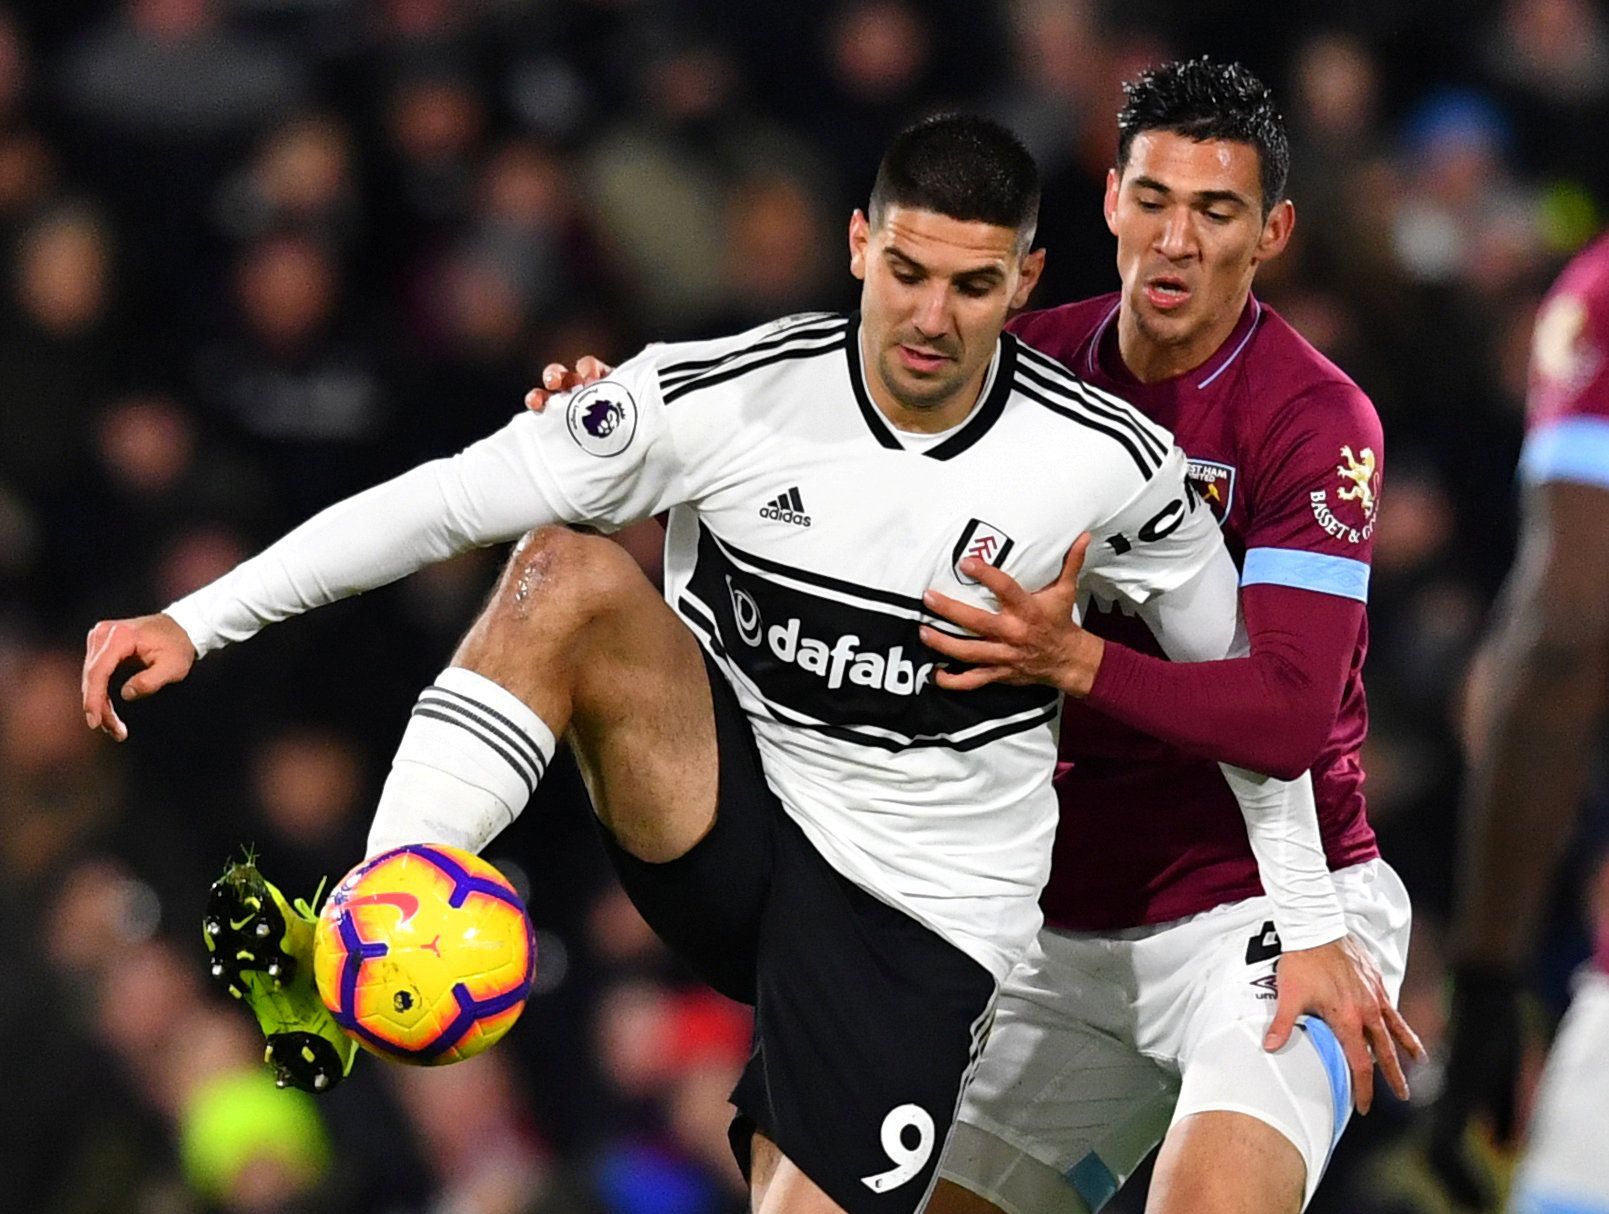 Soccer Football - Premier League - Fulham v West Ham United - Craven Cottage, London, Britain - December 15, 2018  Fulham's Aleksandar Mitrovic in action with West Ham's Fabian Balbuena     REUTERS/Dylan Martinez  EDITORIAL USE ONLY. No use with unauthorized audio, video, data, fixture lists, club/league logos or 